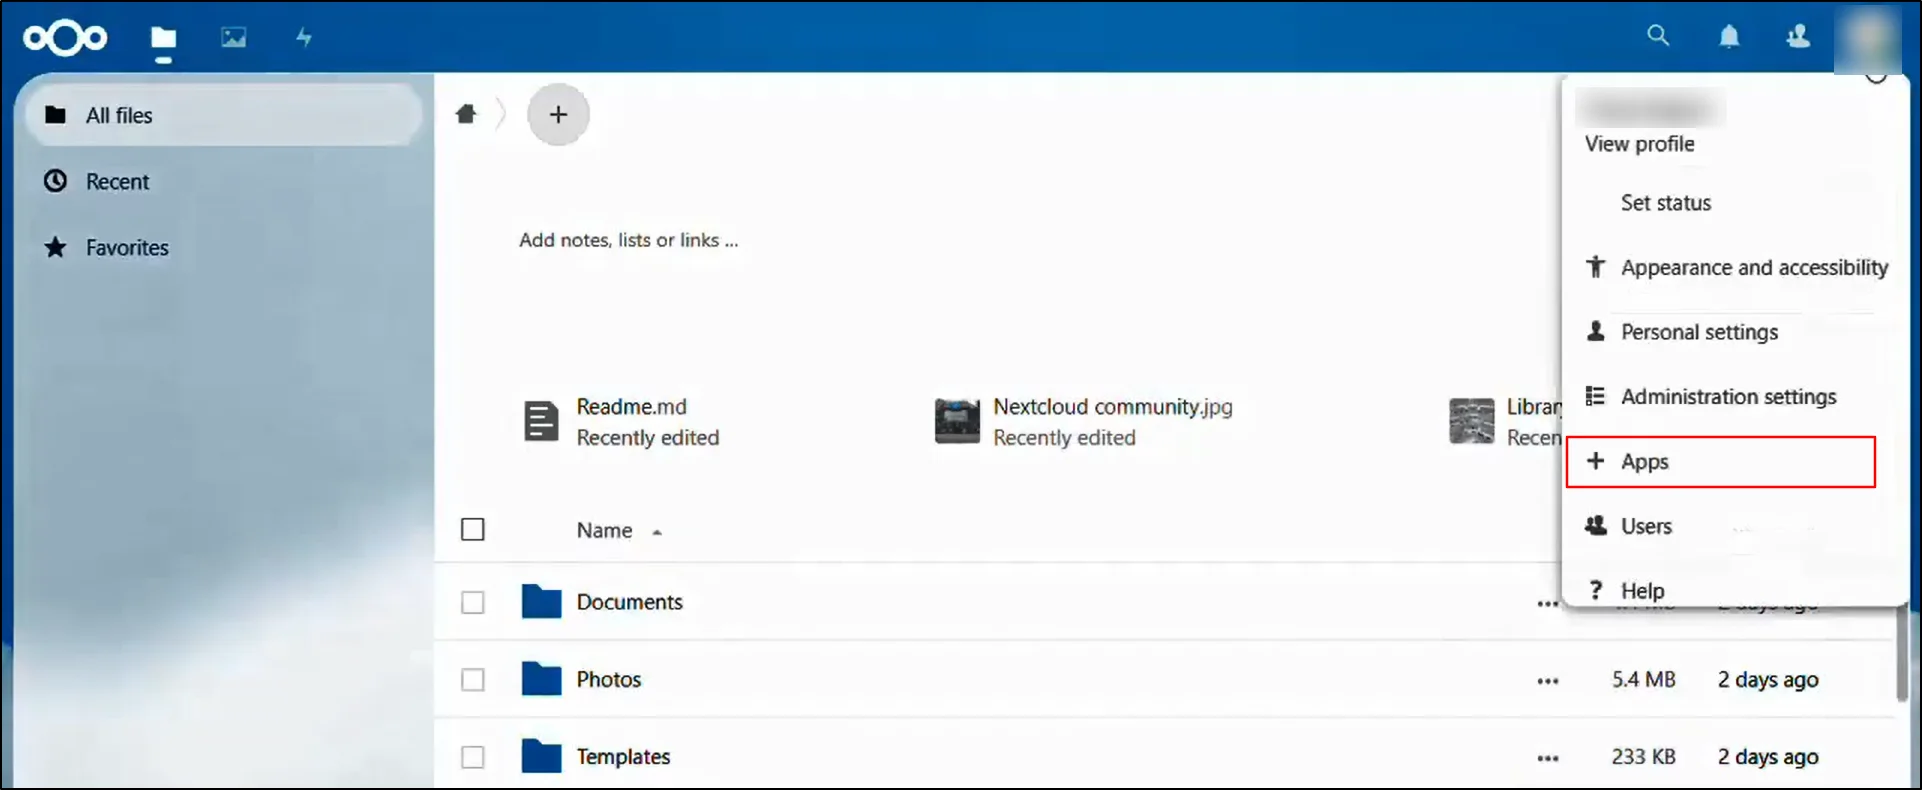 Nextcloud-SAML-Single-Sign-On-Navigate-to-profil-and-click-on-Apps